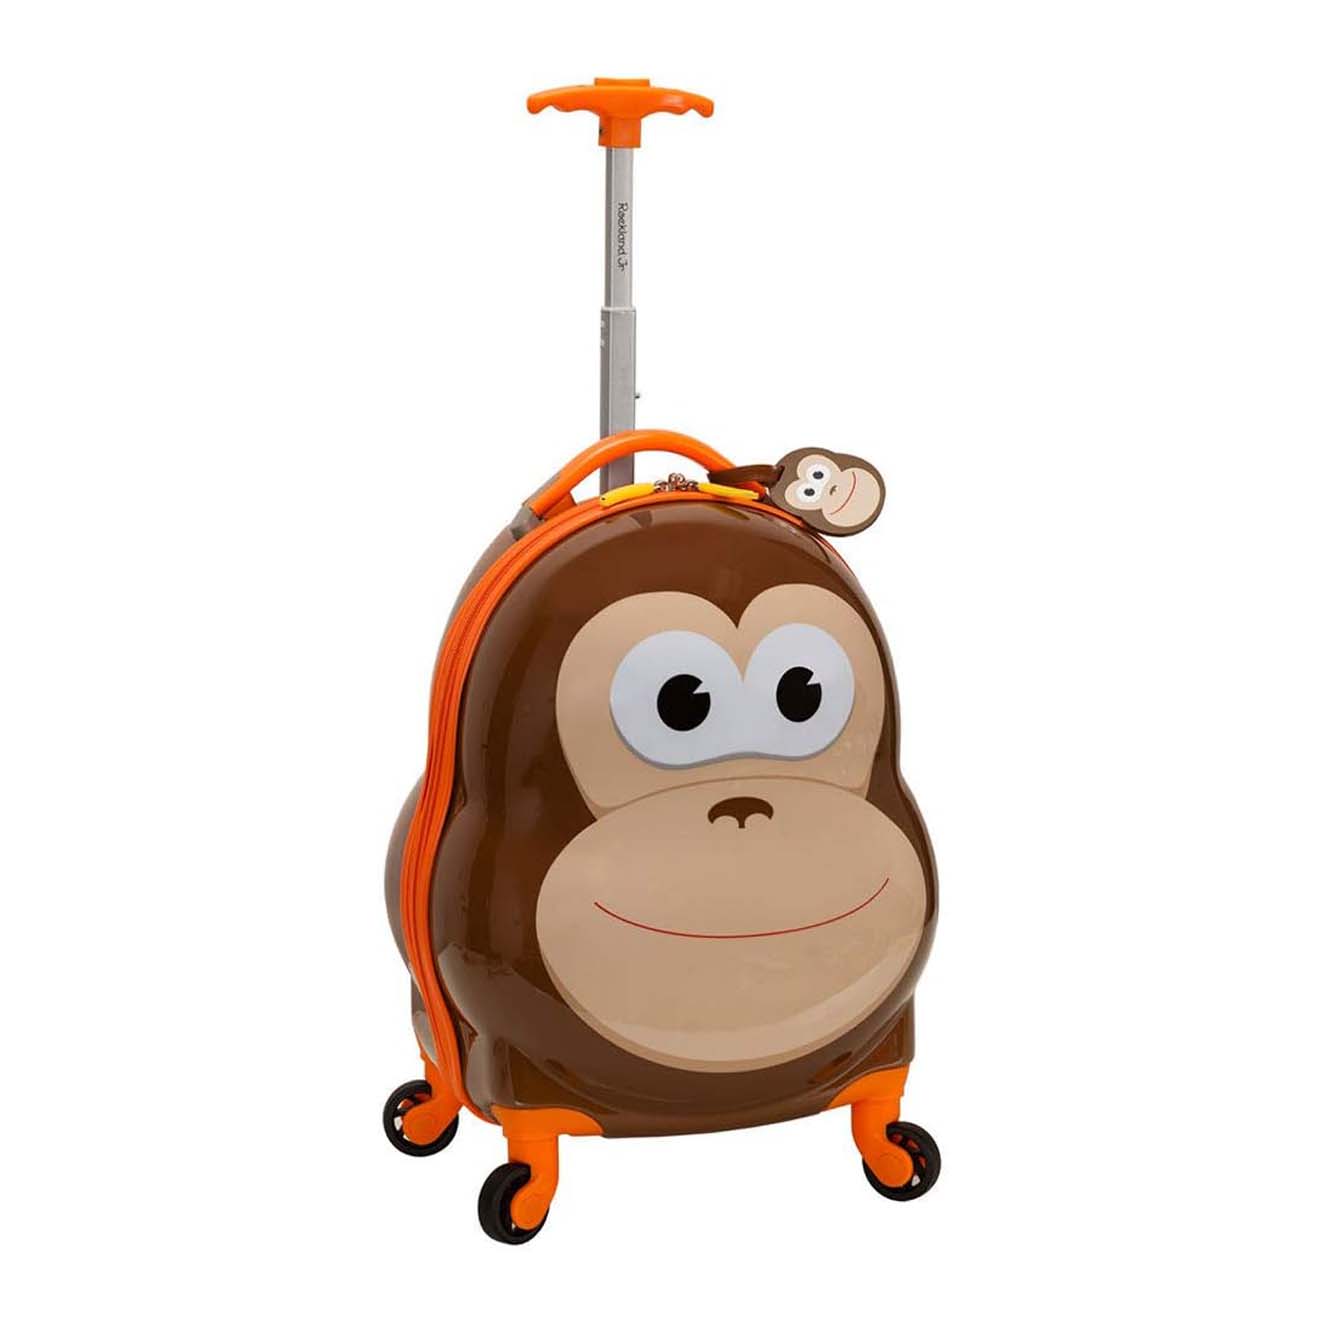 ROCKLAND My First Carry-On Spinner with monkey animal character design